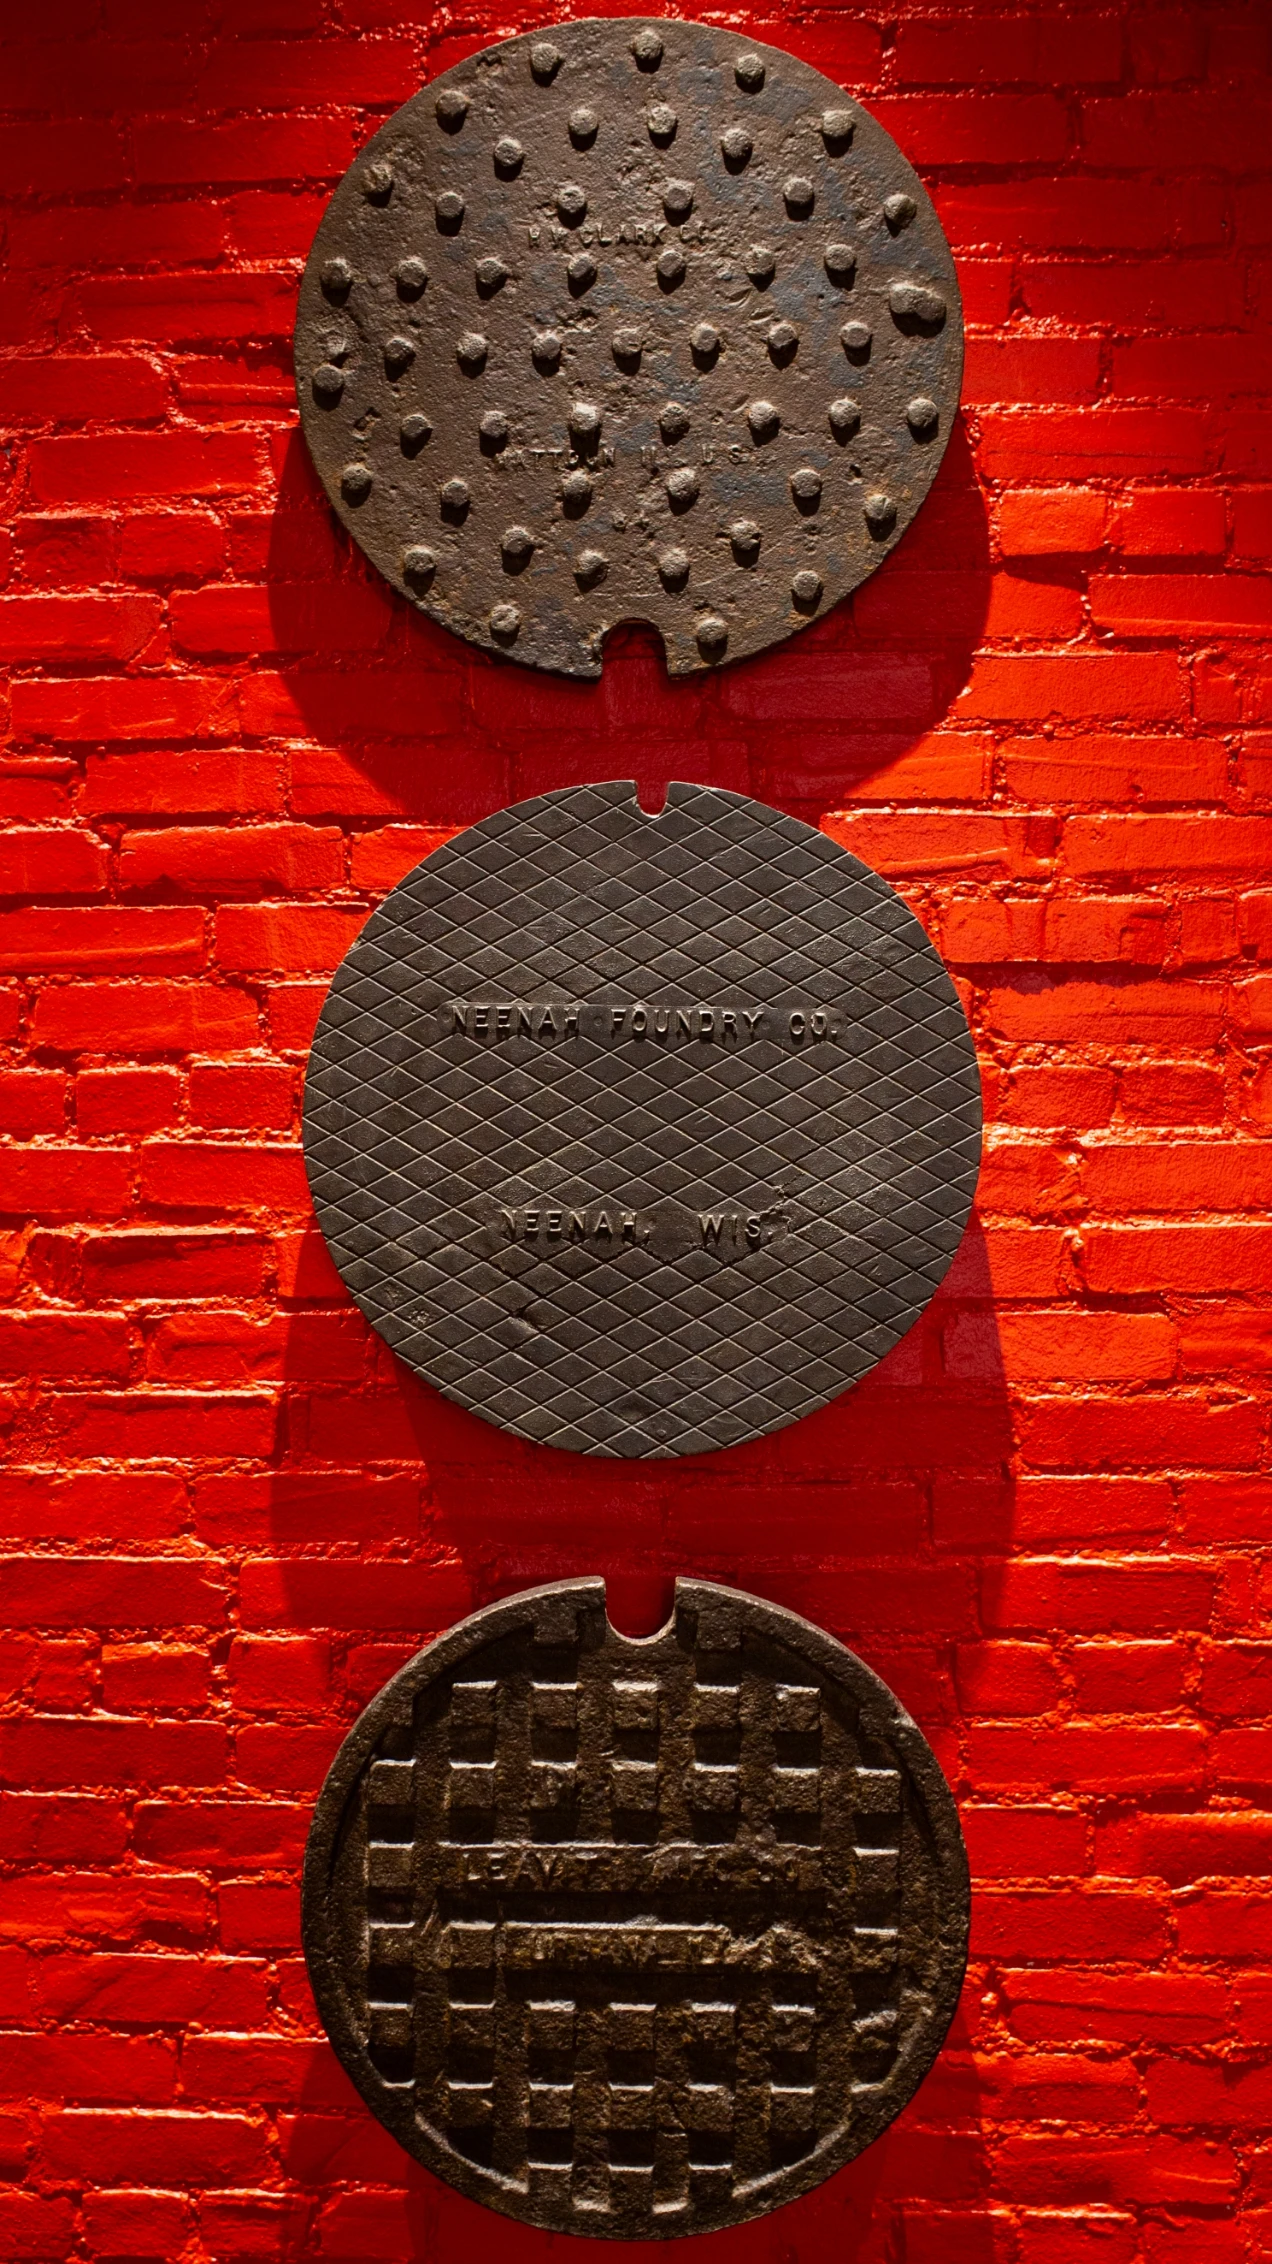 Three manhole covers hanging on a red brick wall.